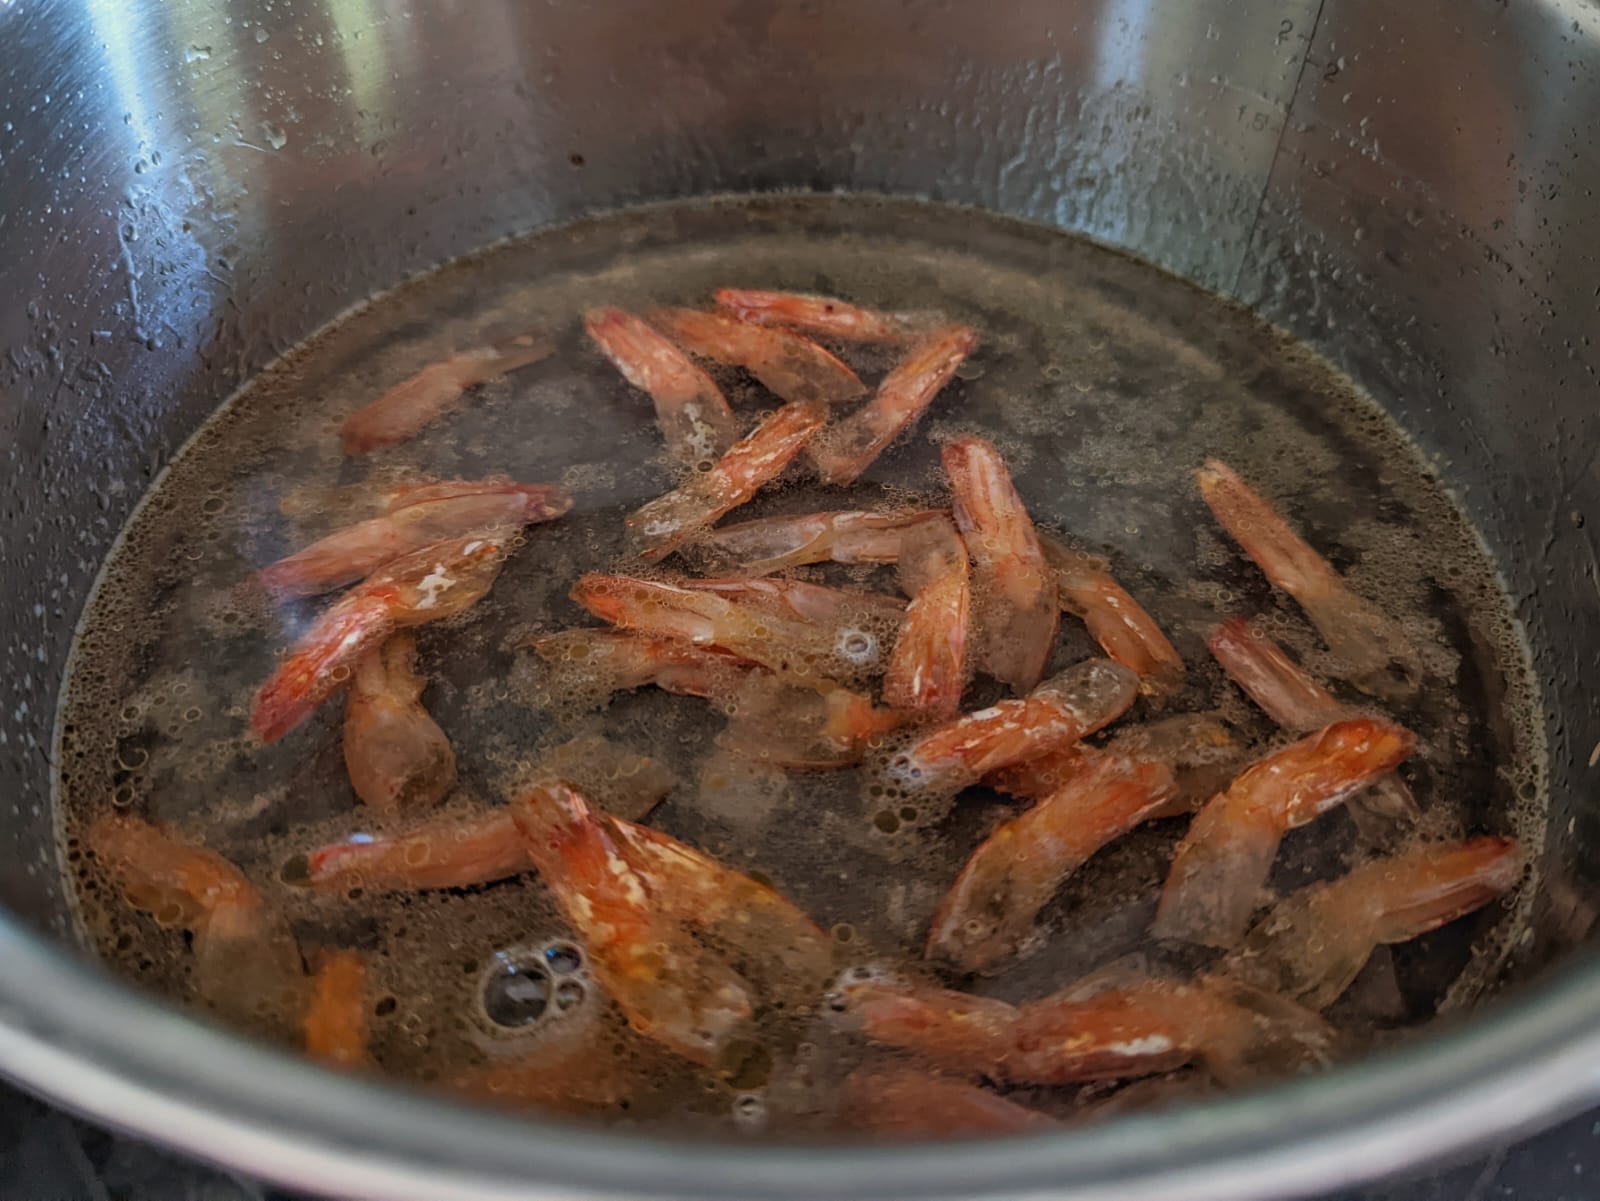 Shrimp tails boiling in water with salt.